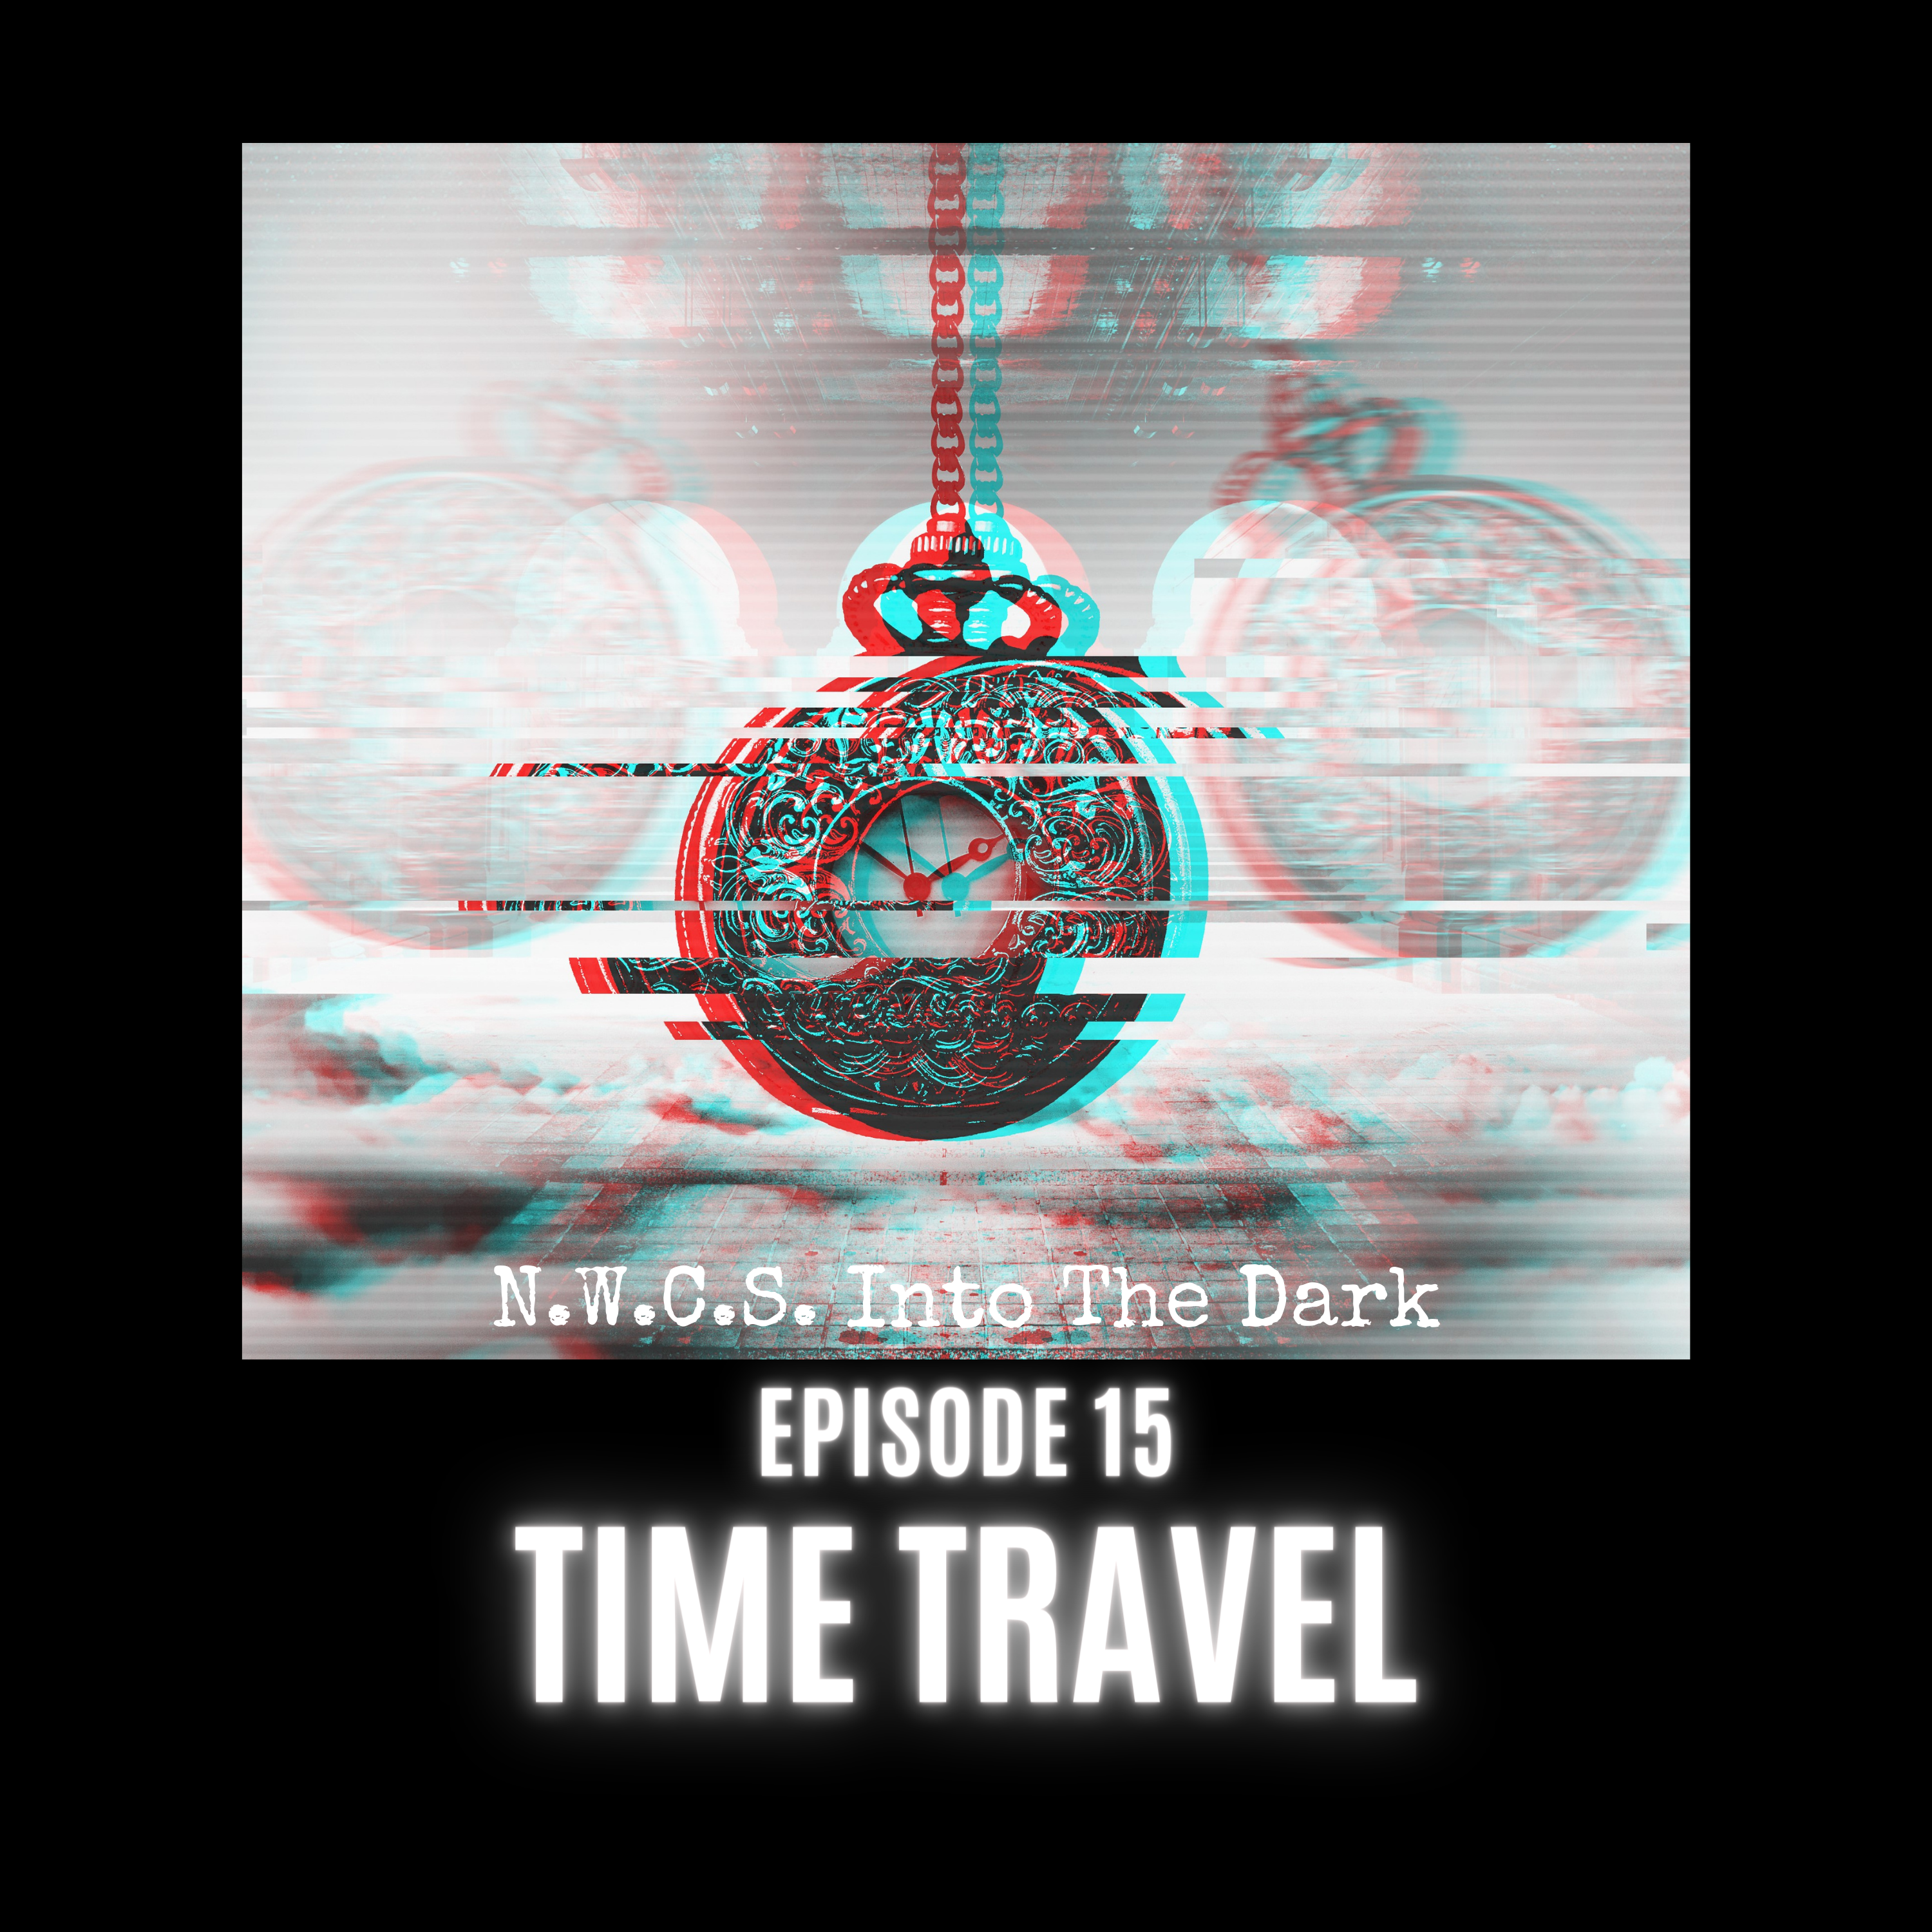 N.W.C.S. Into The Dark - Episode 15 Time Travel